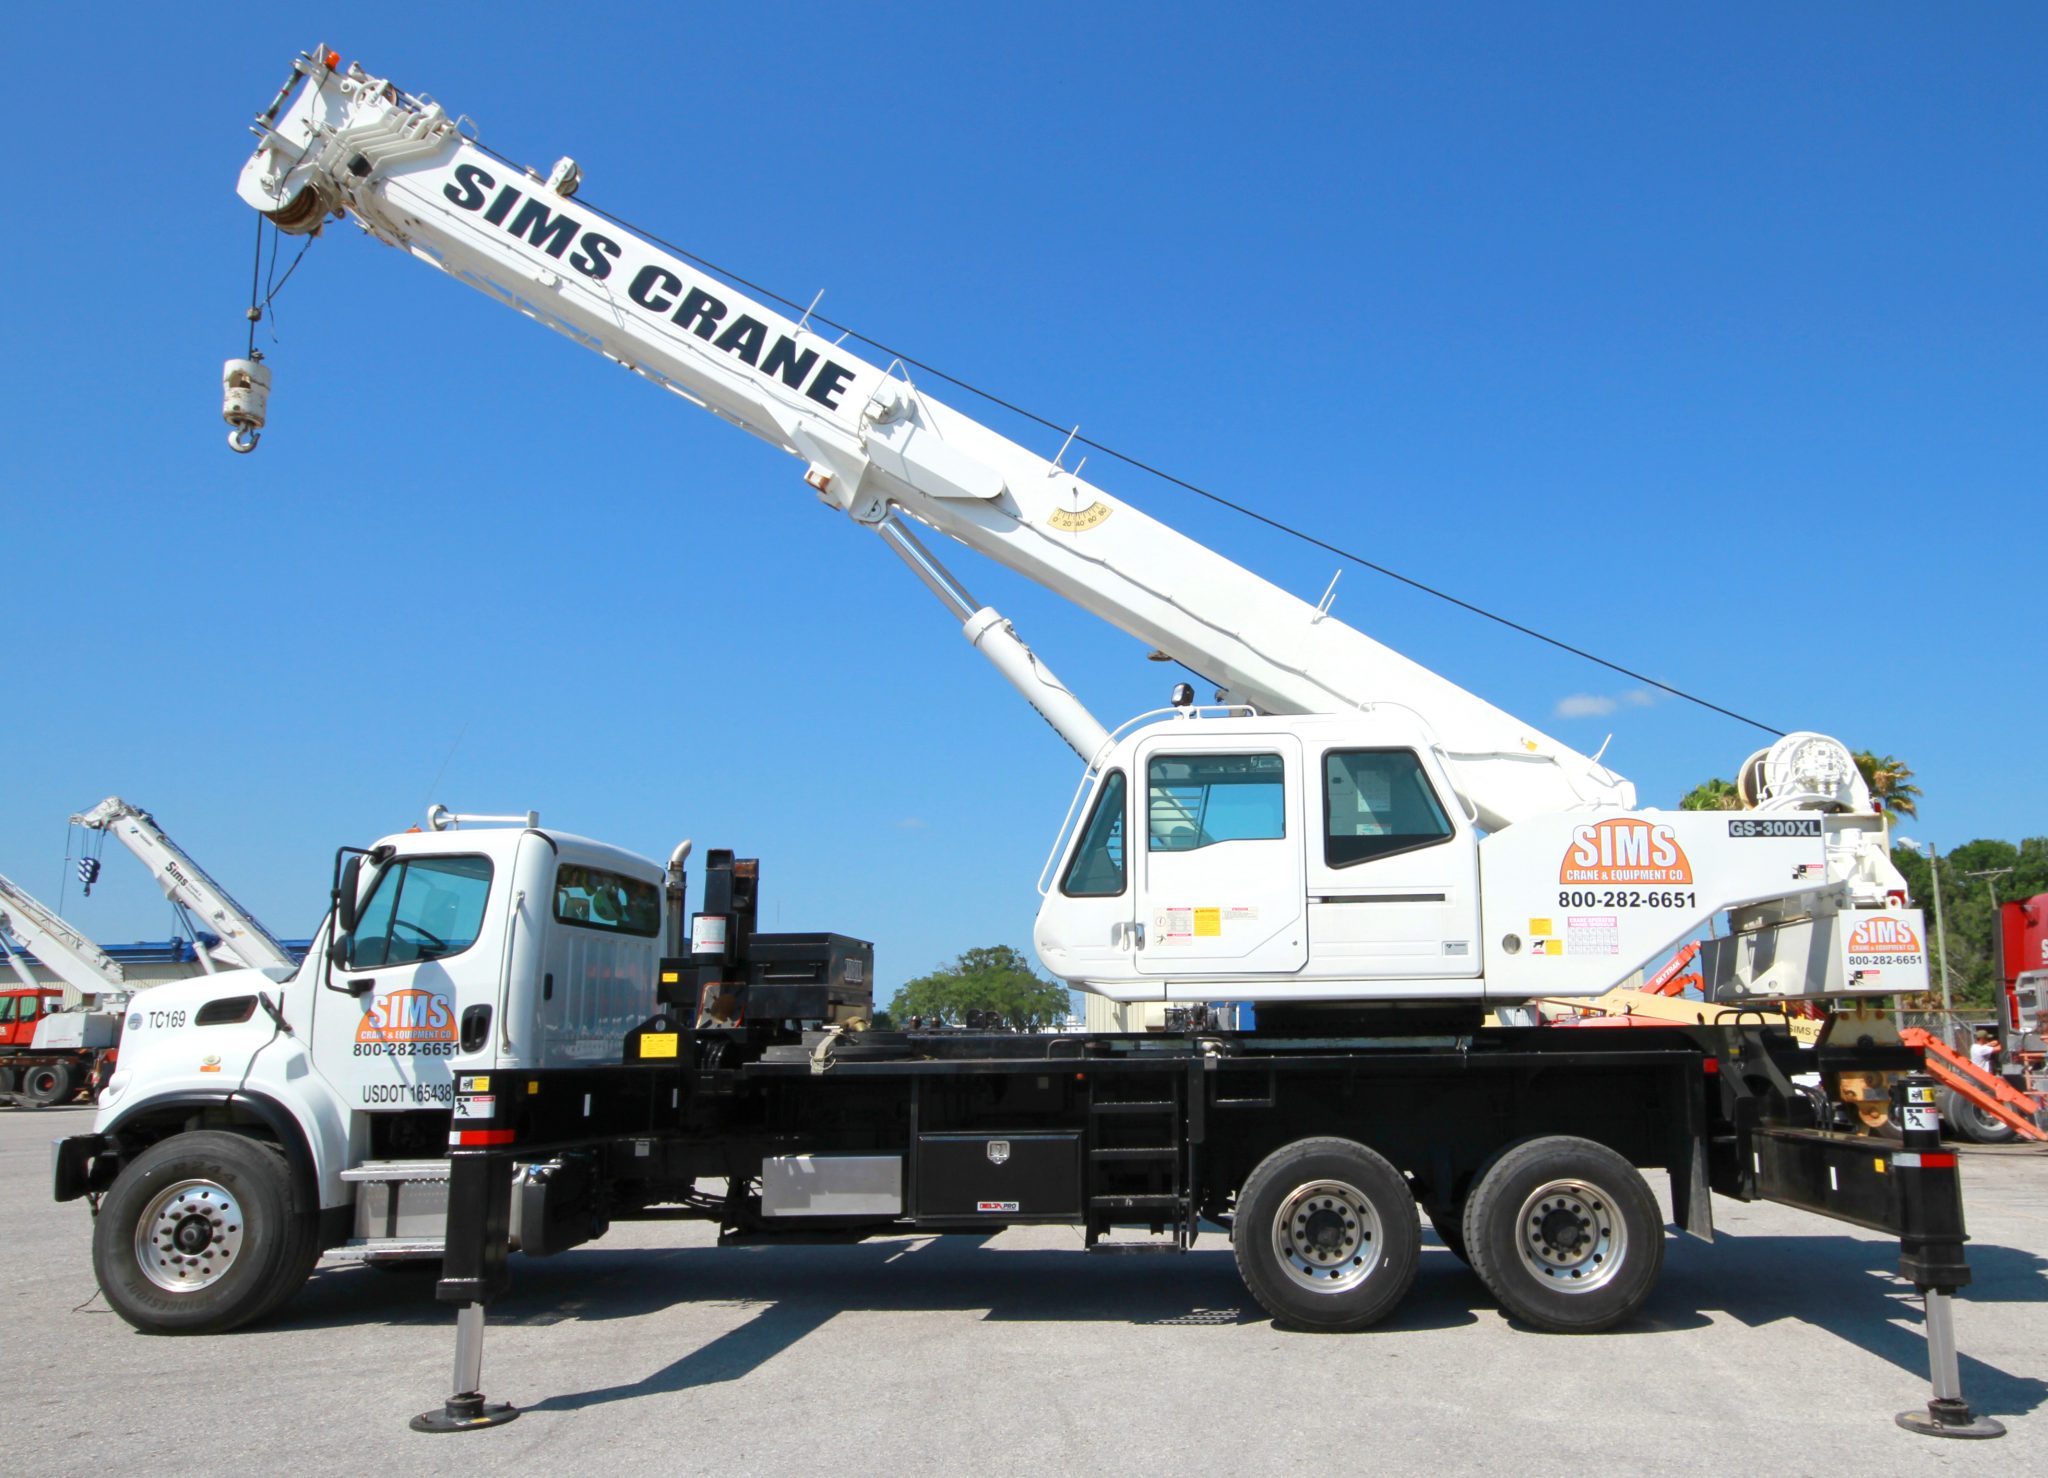 Boom Truck For Tampa Miami Orlando Naples Ft Lauderdale Tallahassee Surrounding Cities